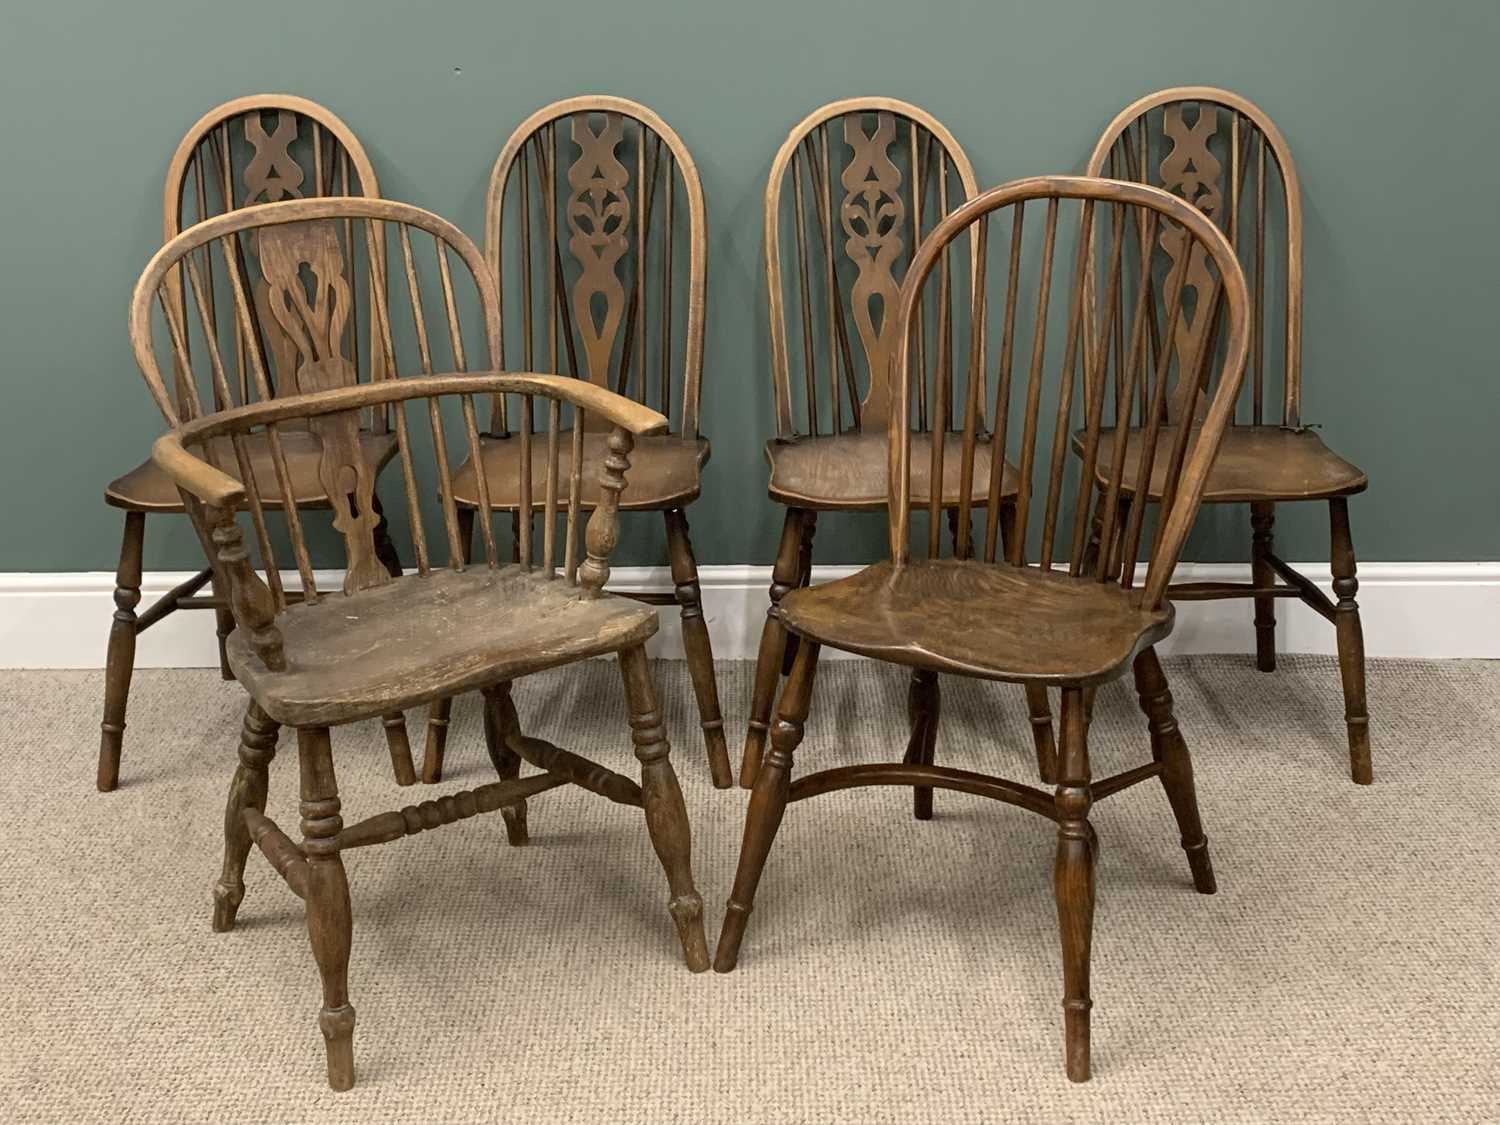 WINDSOR CHAIRS (6), a set of four, an oak comb-back and a hoop back with crinoline stretcher